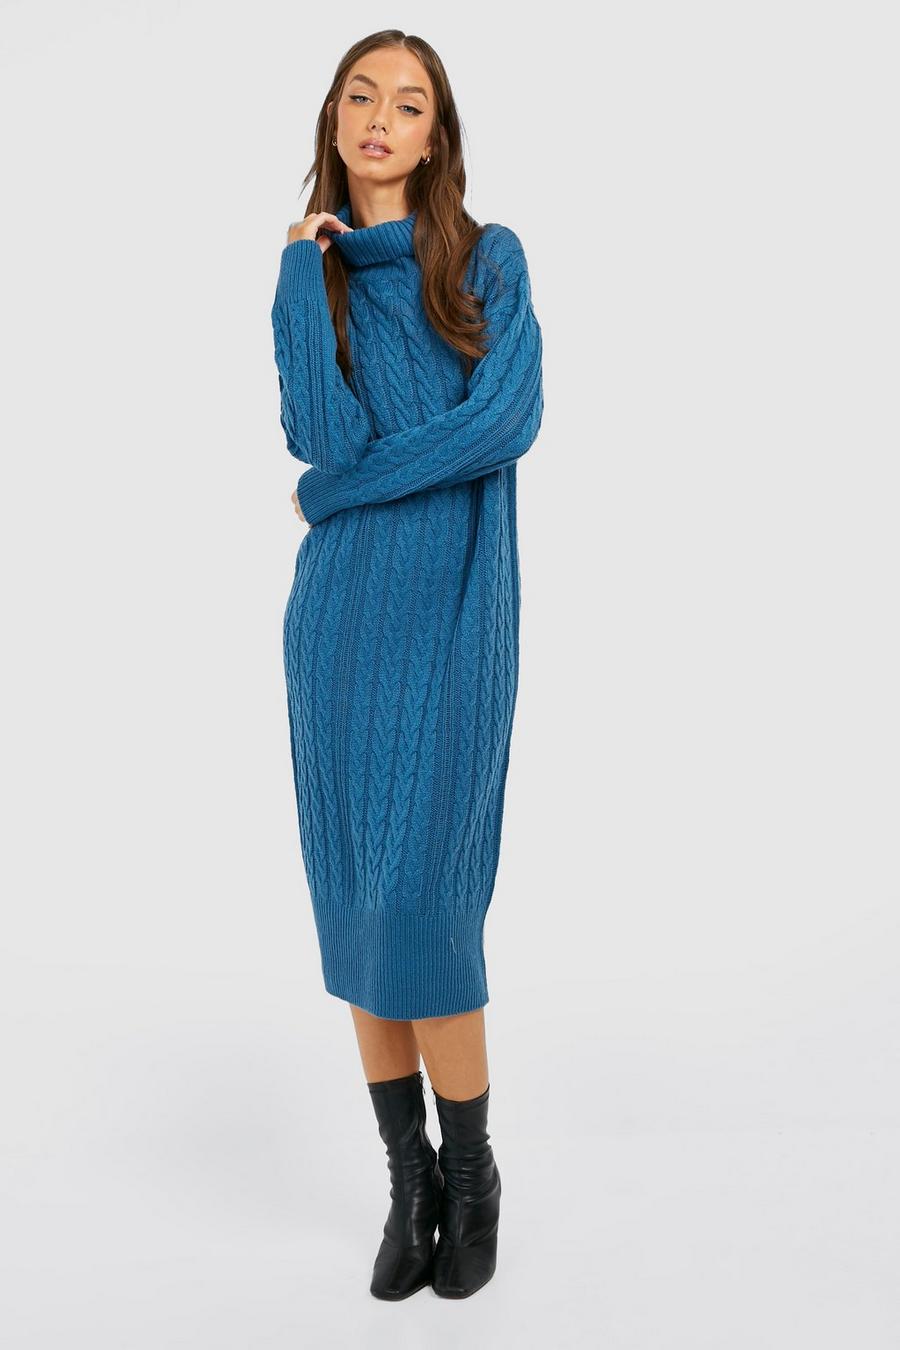 Teal Cable Knit Roll Neck Midi Dress